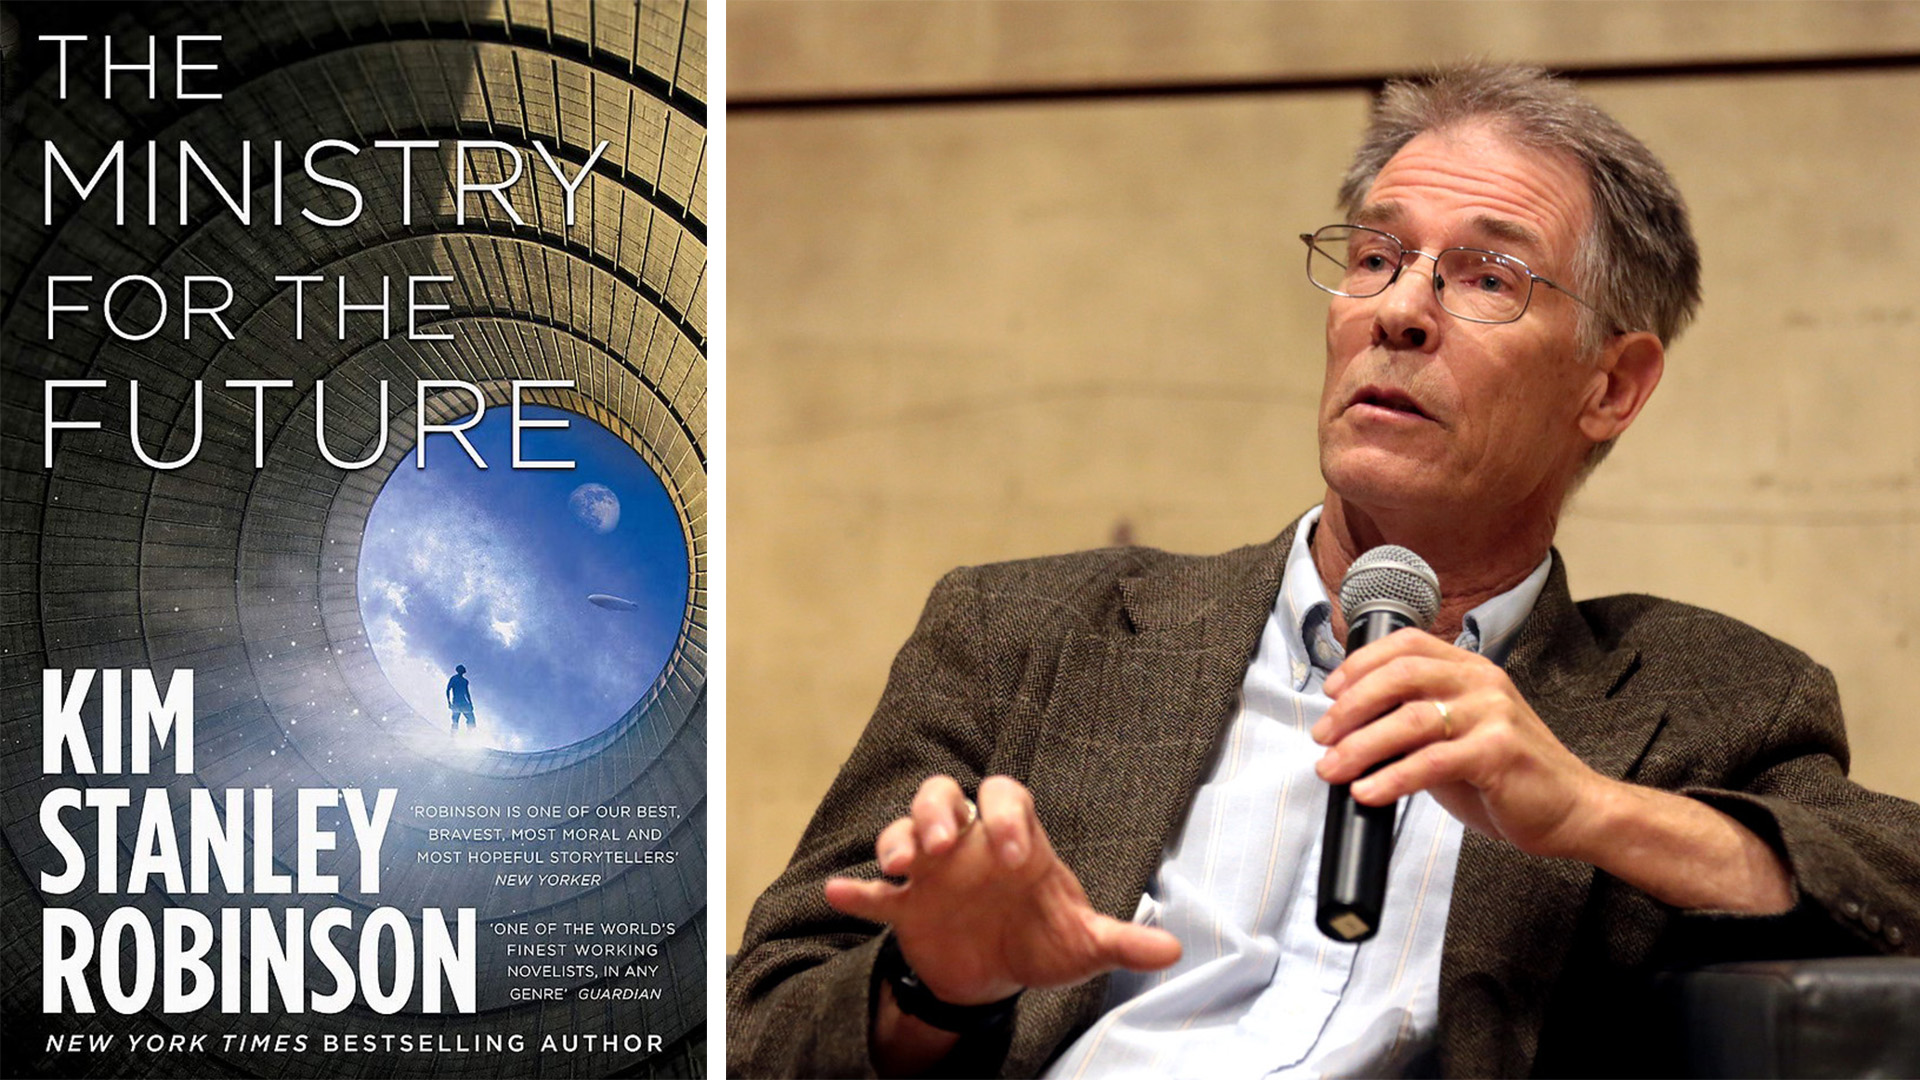 Two images side by side: The first is a book cover of The Ministry for the Future; second is Kim Stanley Robinson holding a mic while giving a talk